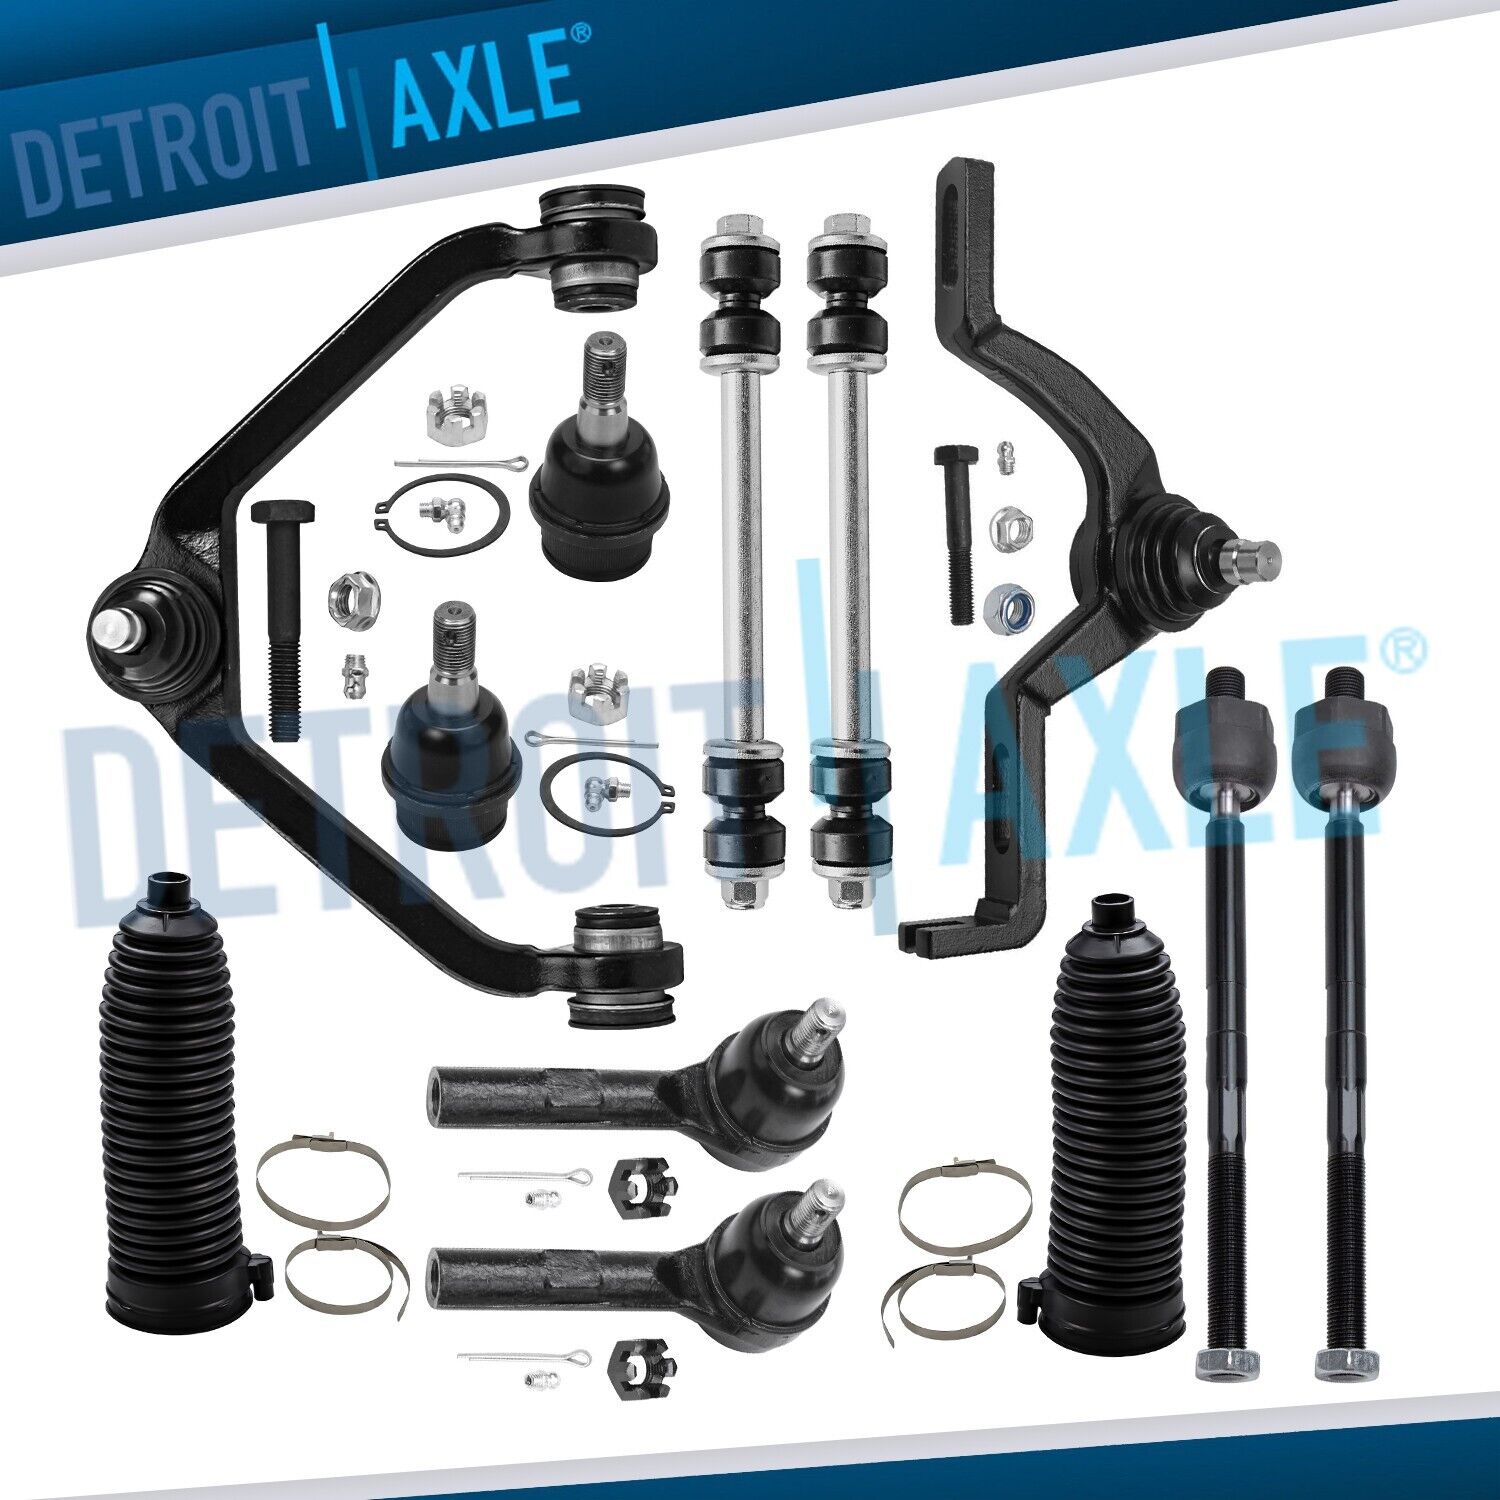 New 12pc Front Upper + Lower Suspension Kit for Ford Sport Trac - 2 Piece Design